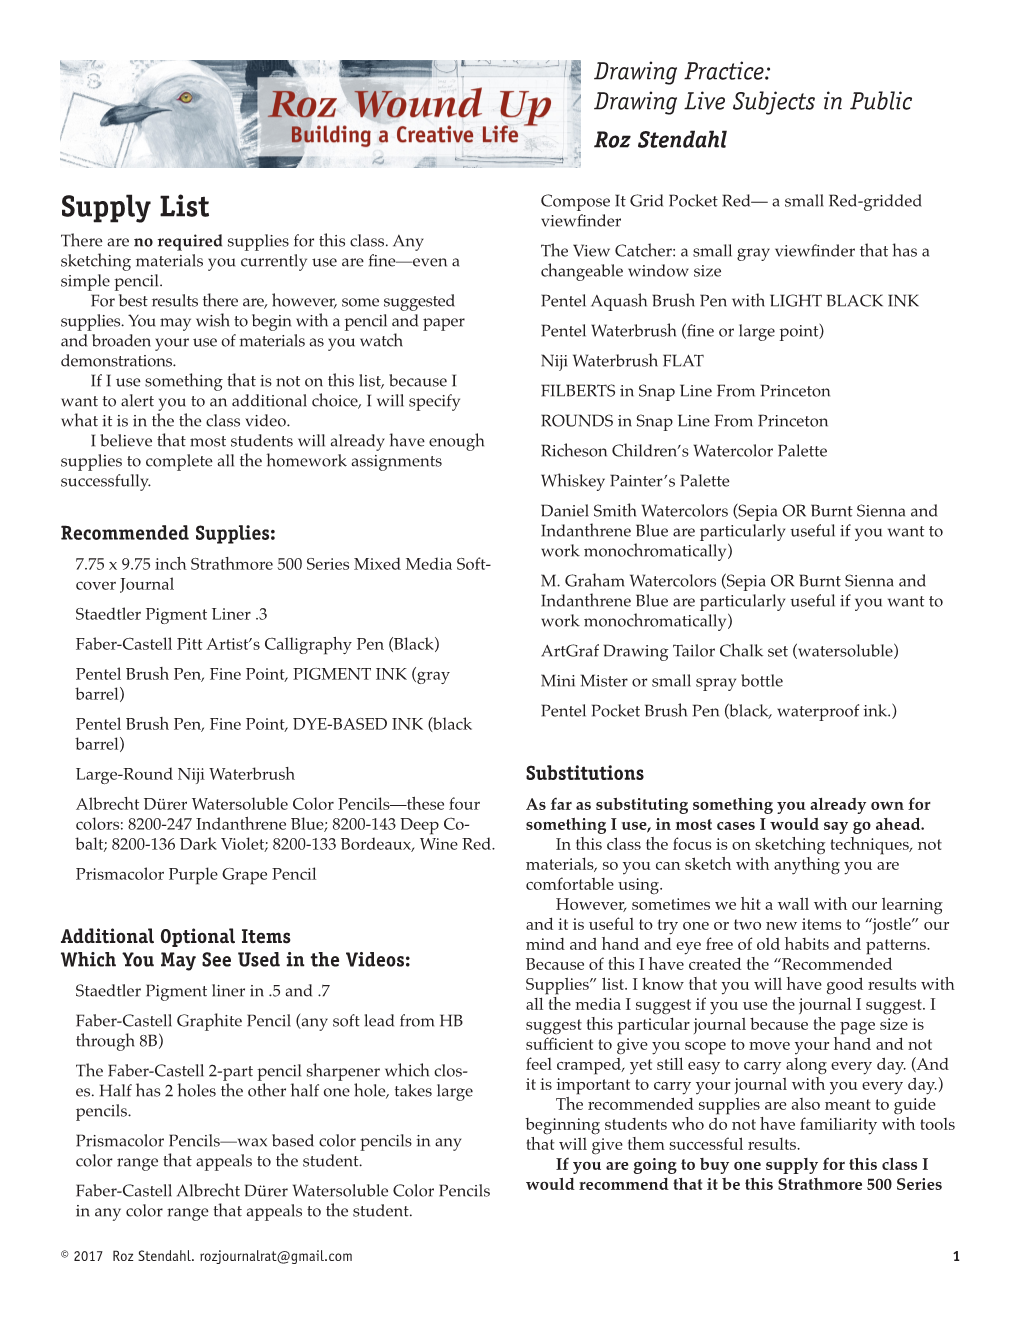 A Downloadable PDF of the Supply List for This Class